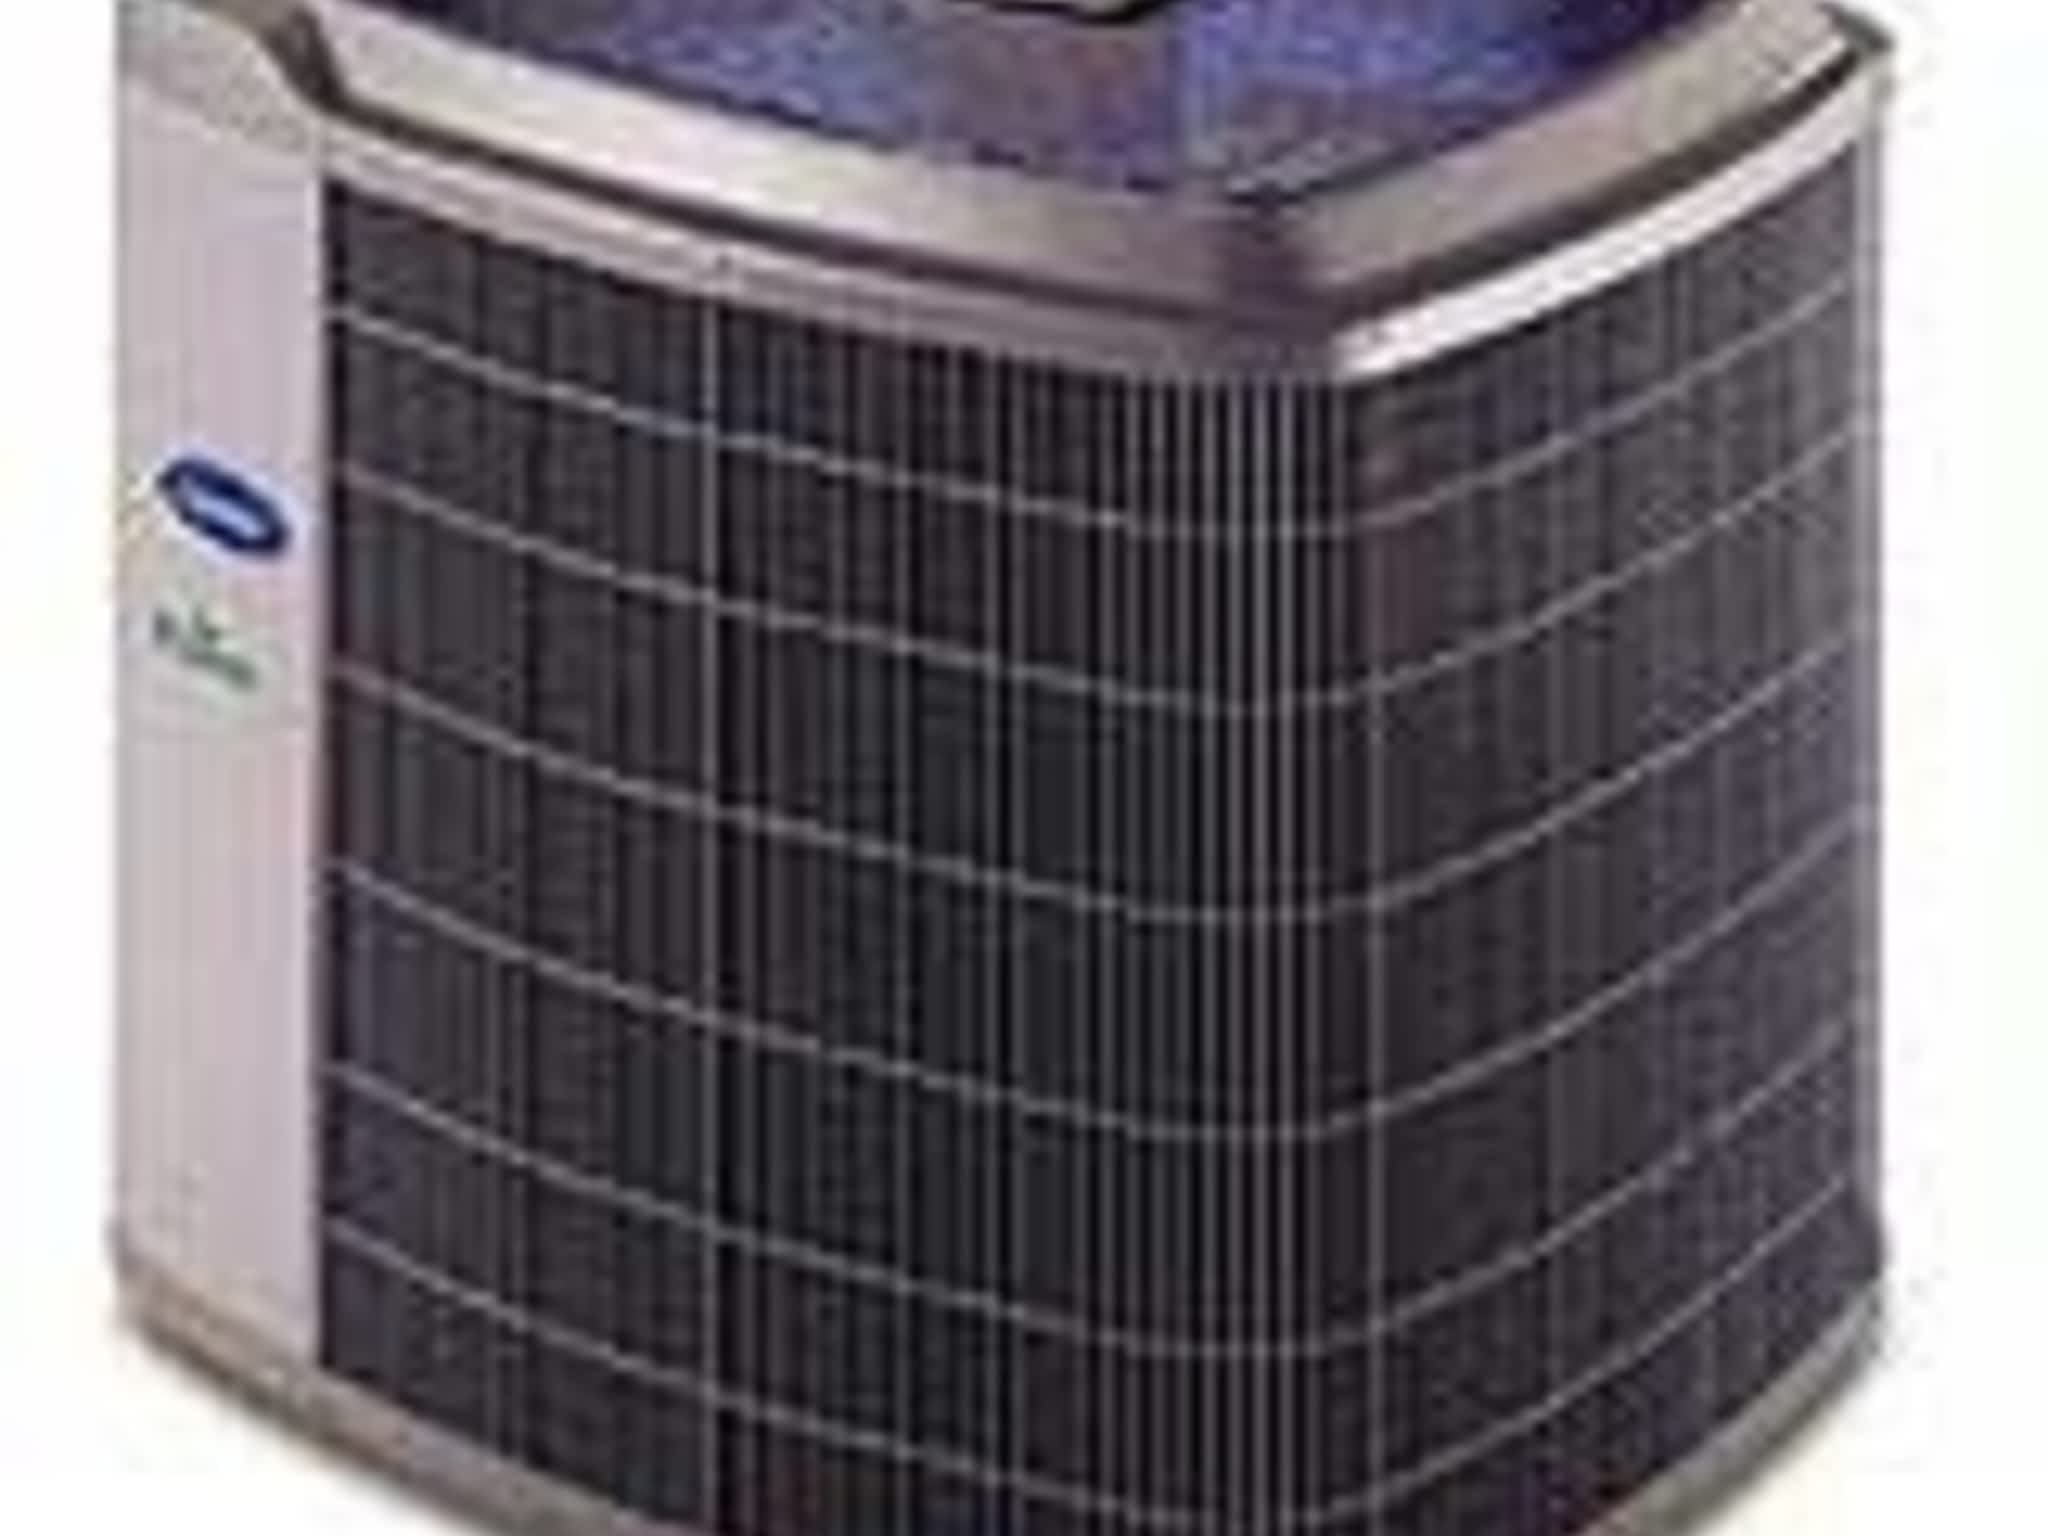 photo Affordable Heating & Cooling